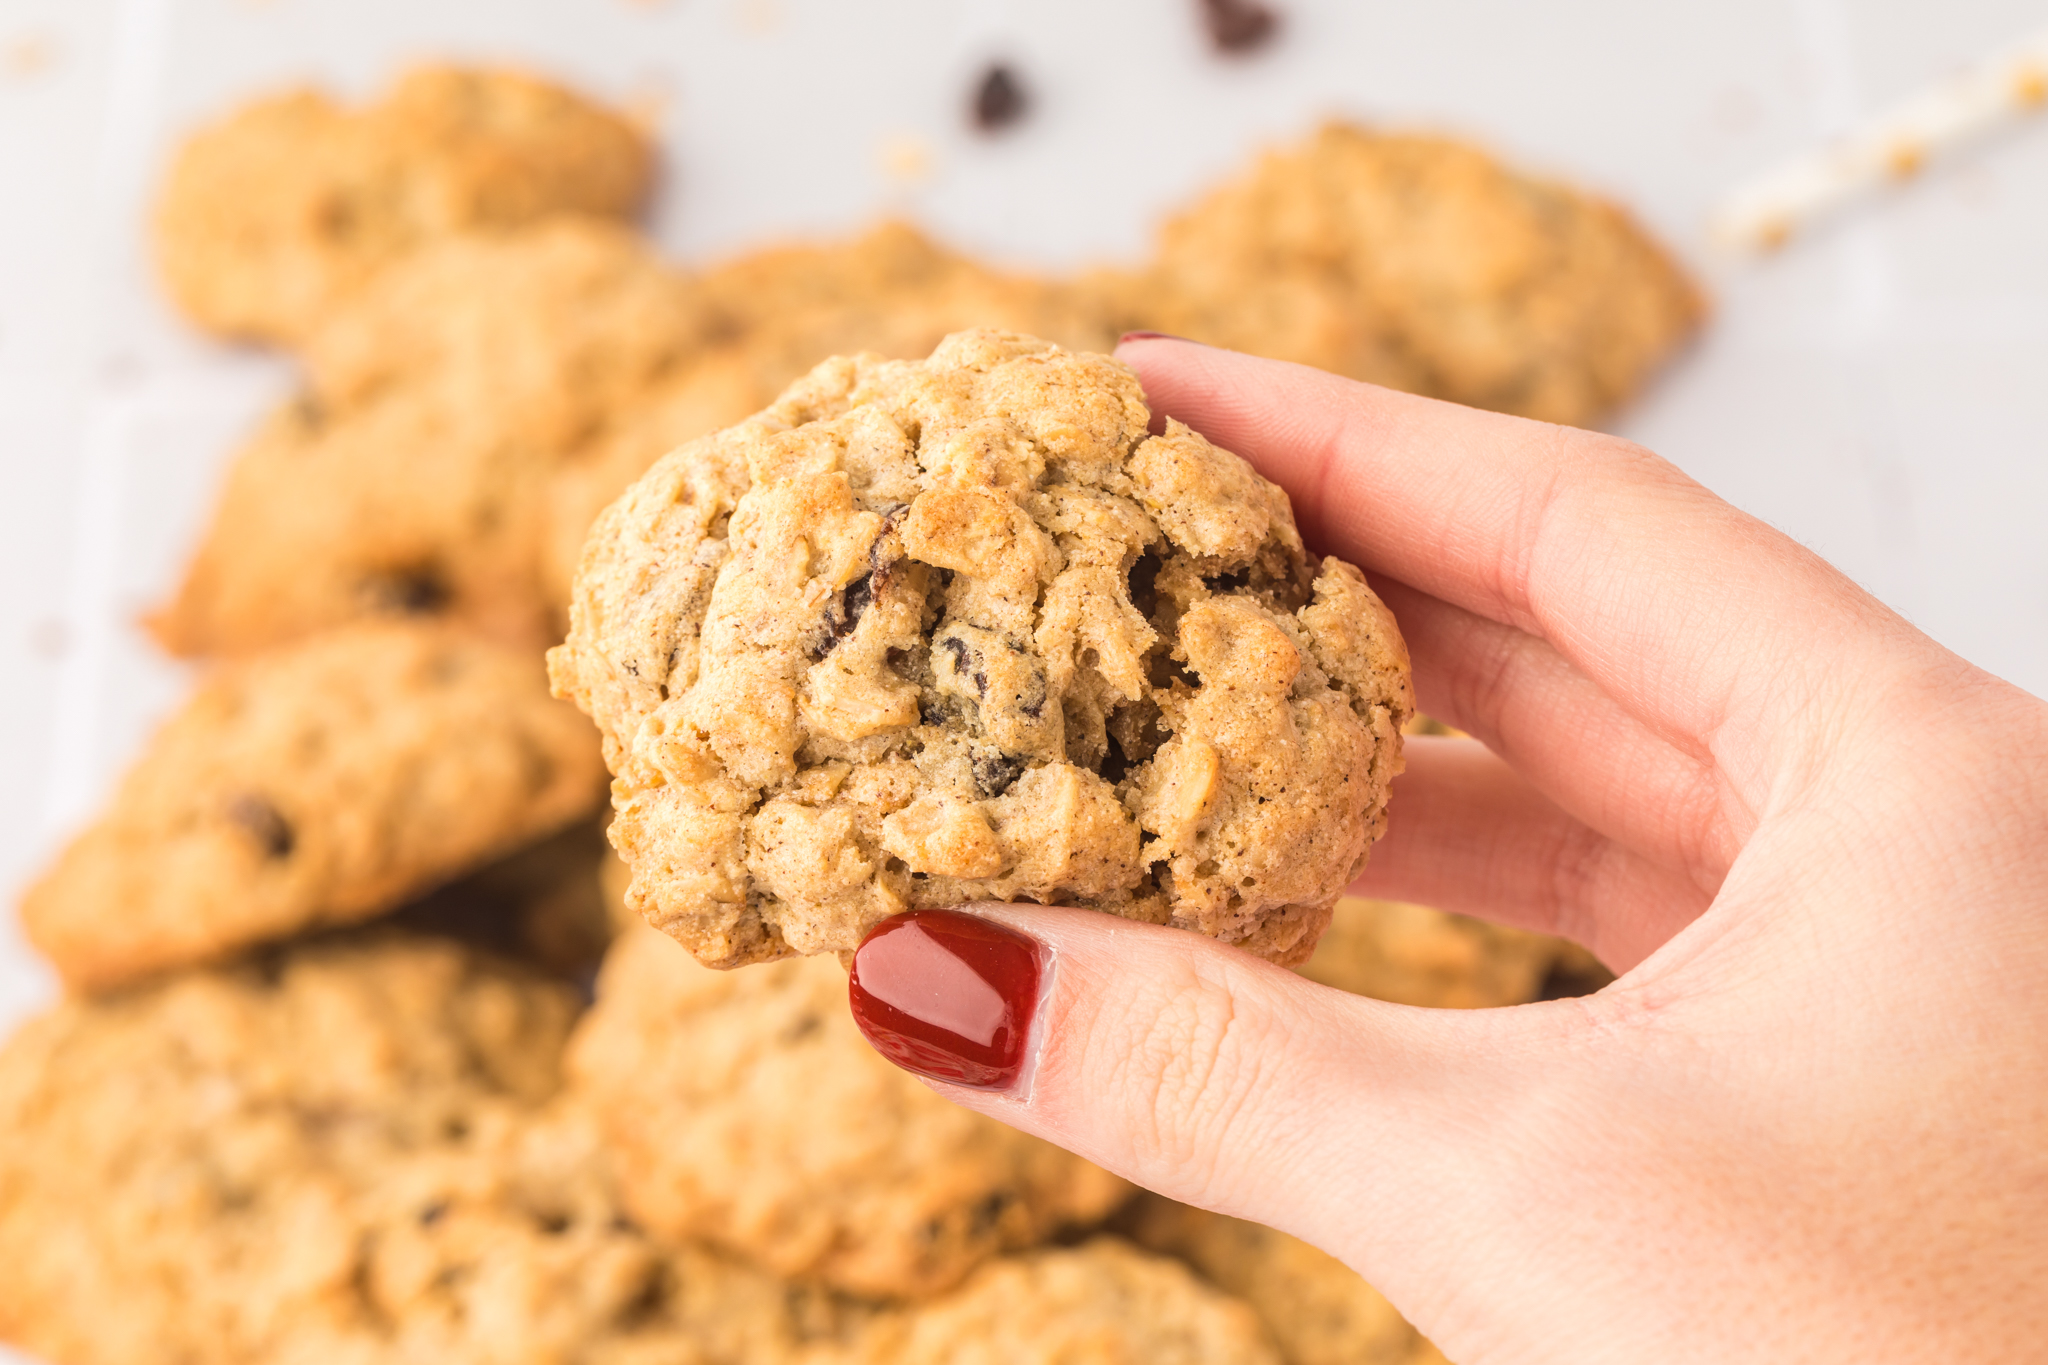 A close up photo of a hand holding an oatmeal raisin cookie